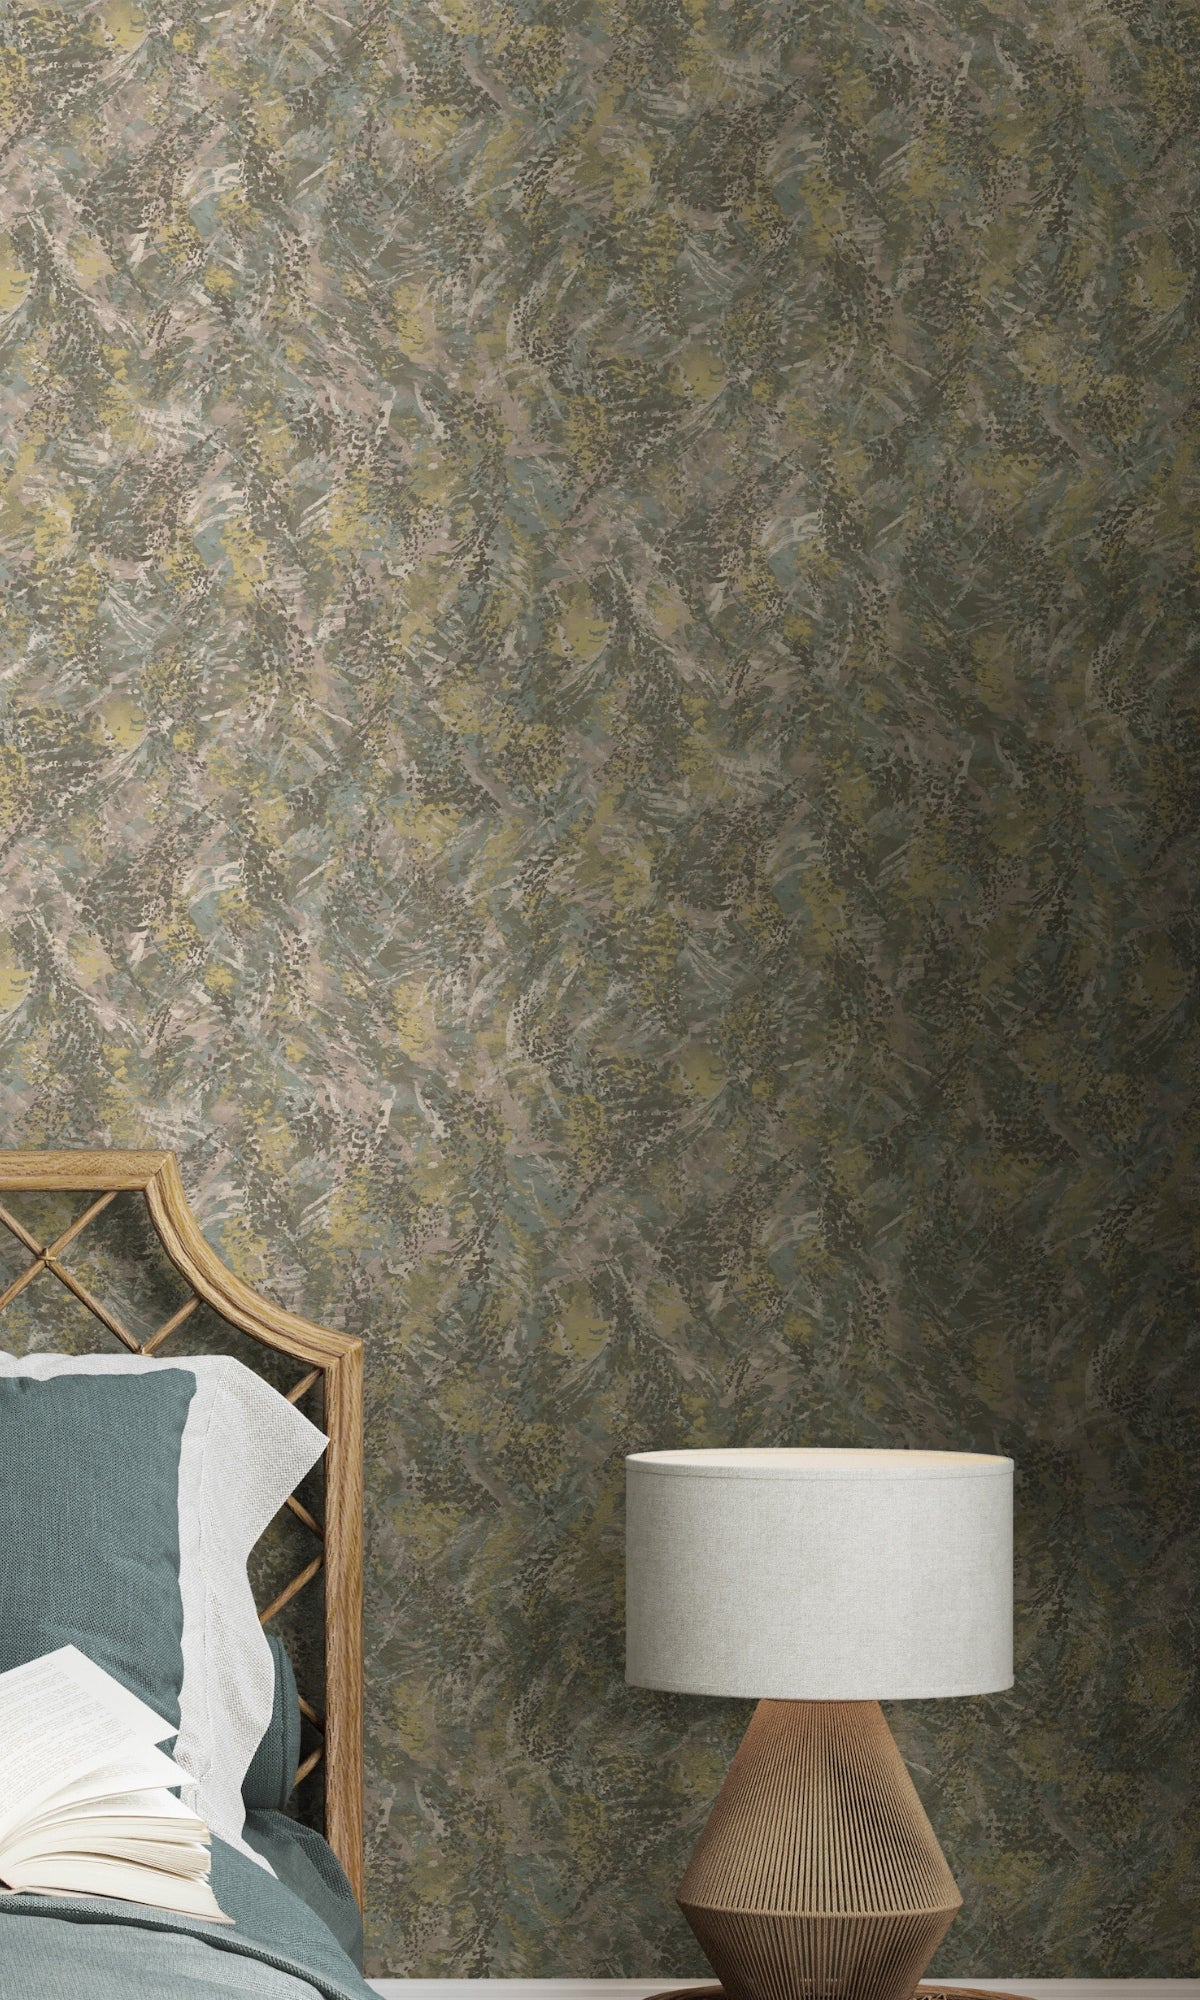 Blush Khaki Feather Like Textured Abstract Wallpaper R8938